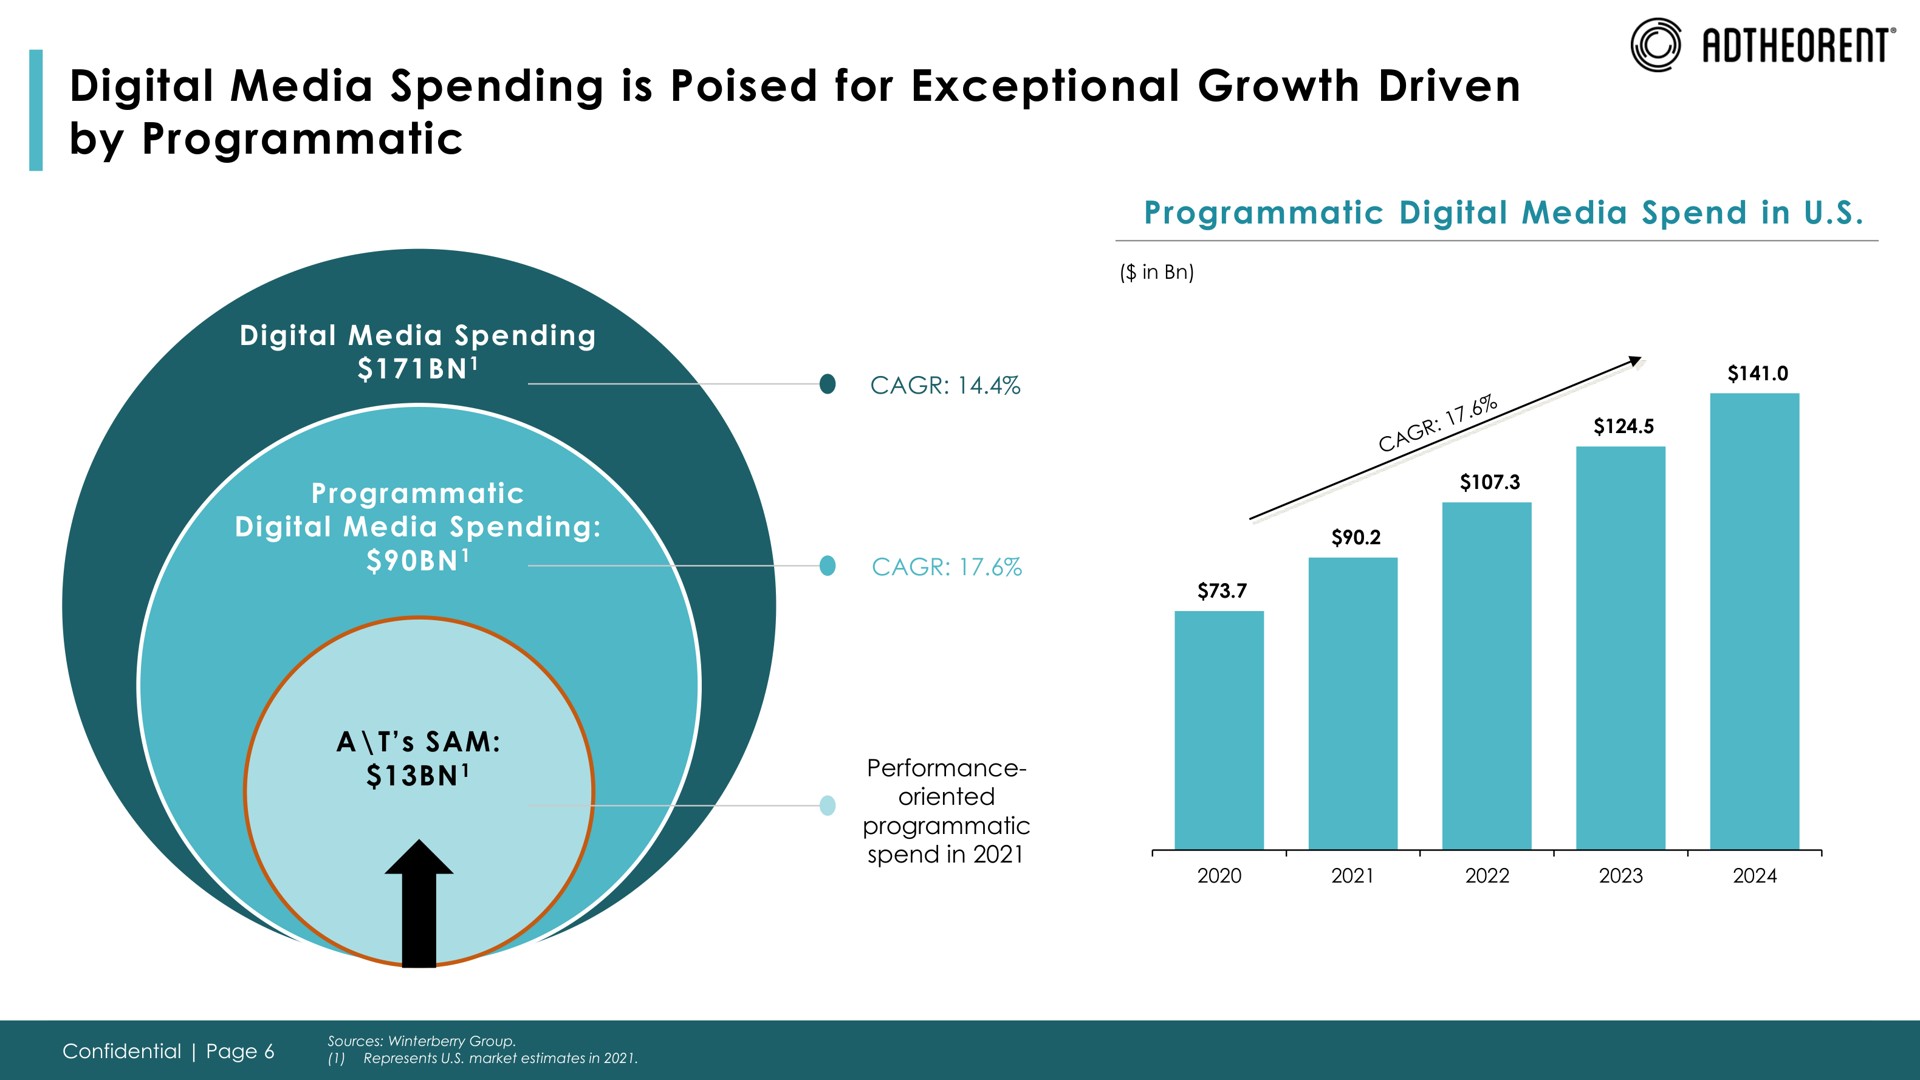 digital media spending is poised for exceptional growth driven by programmatic | Adtheorent